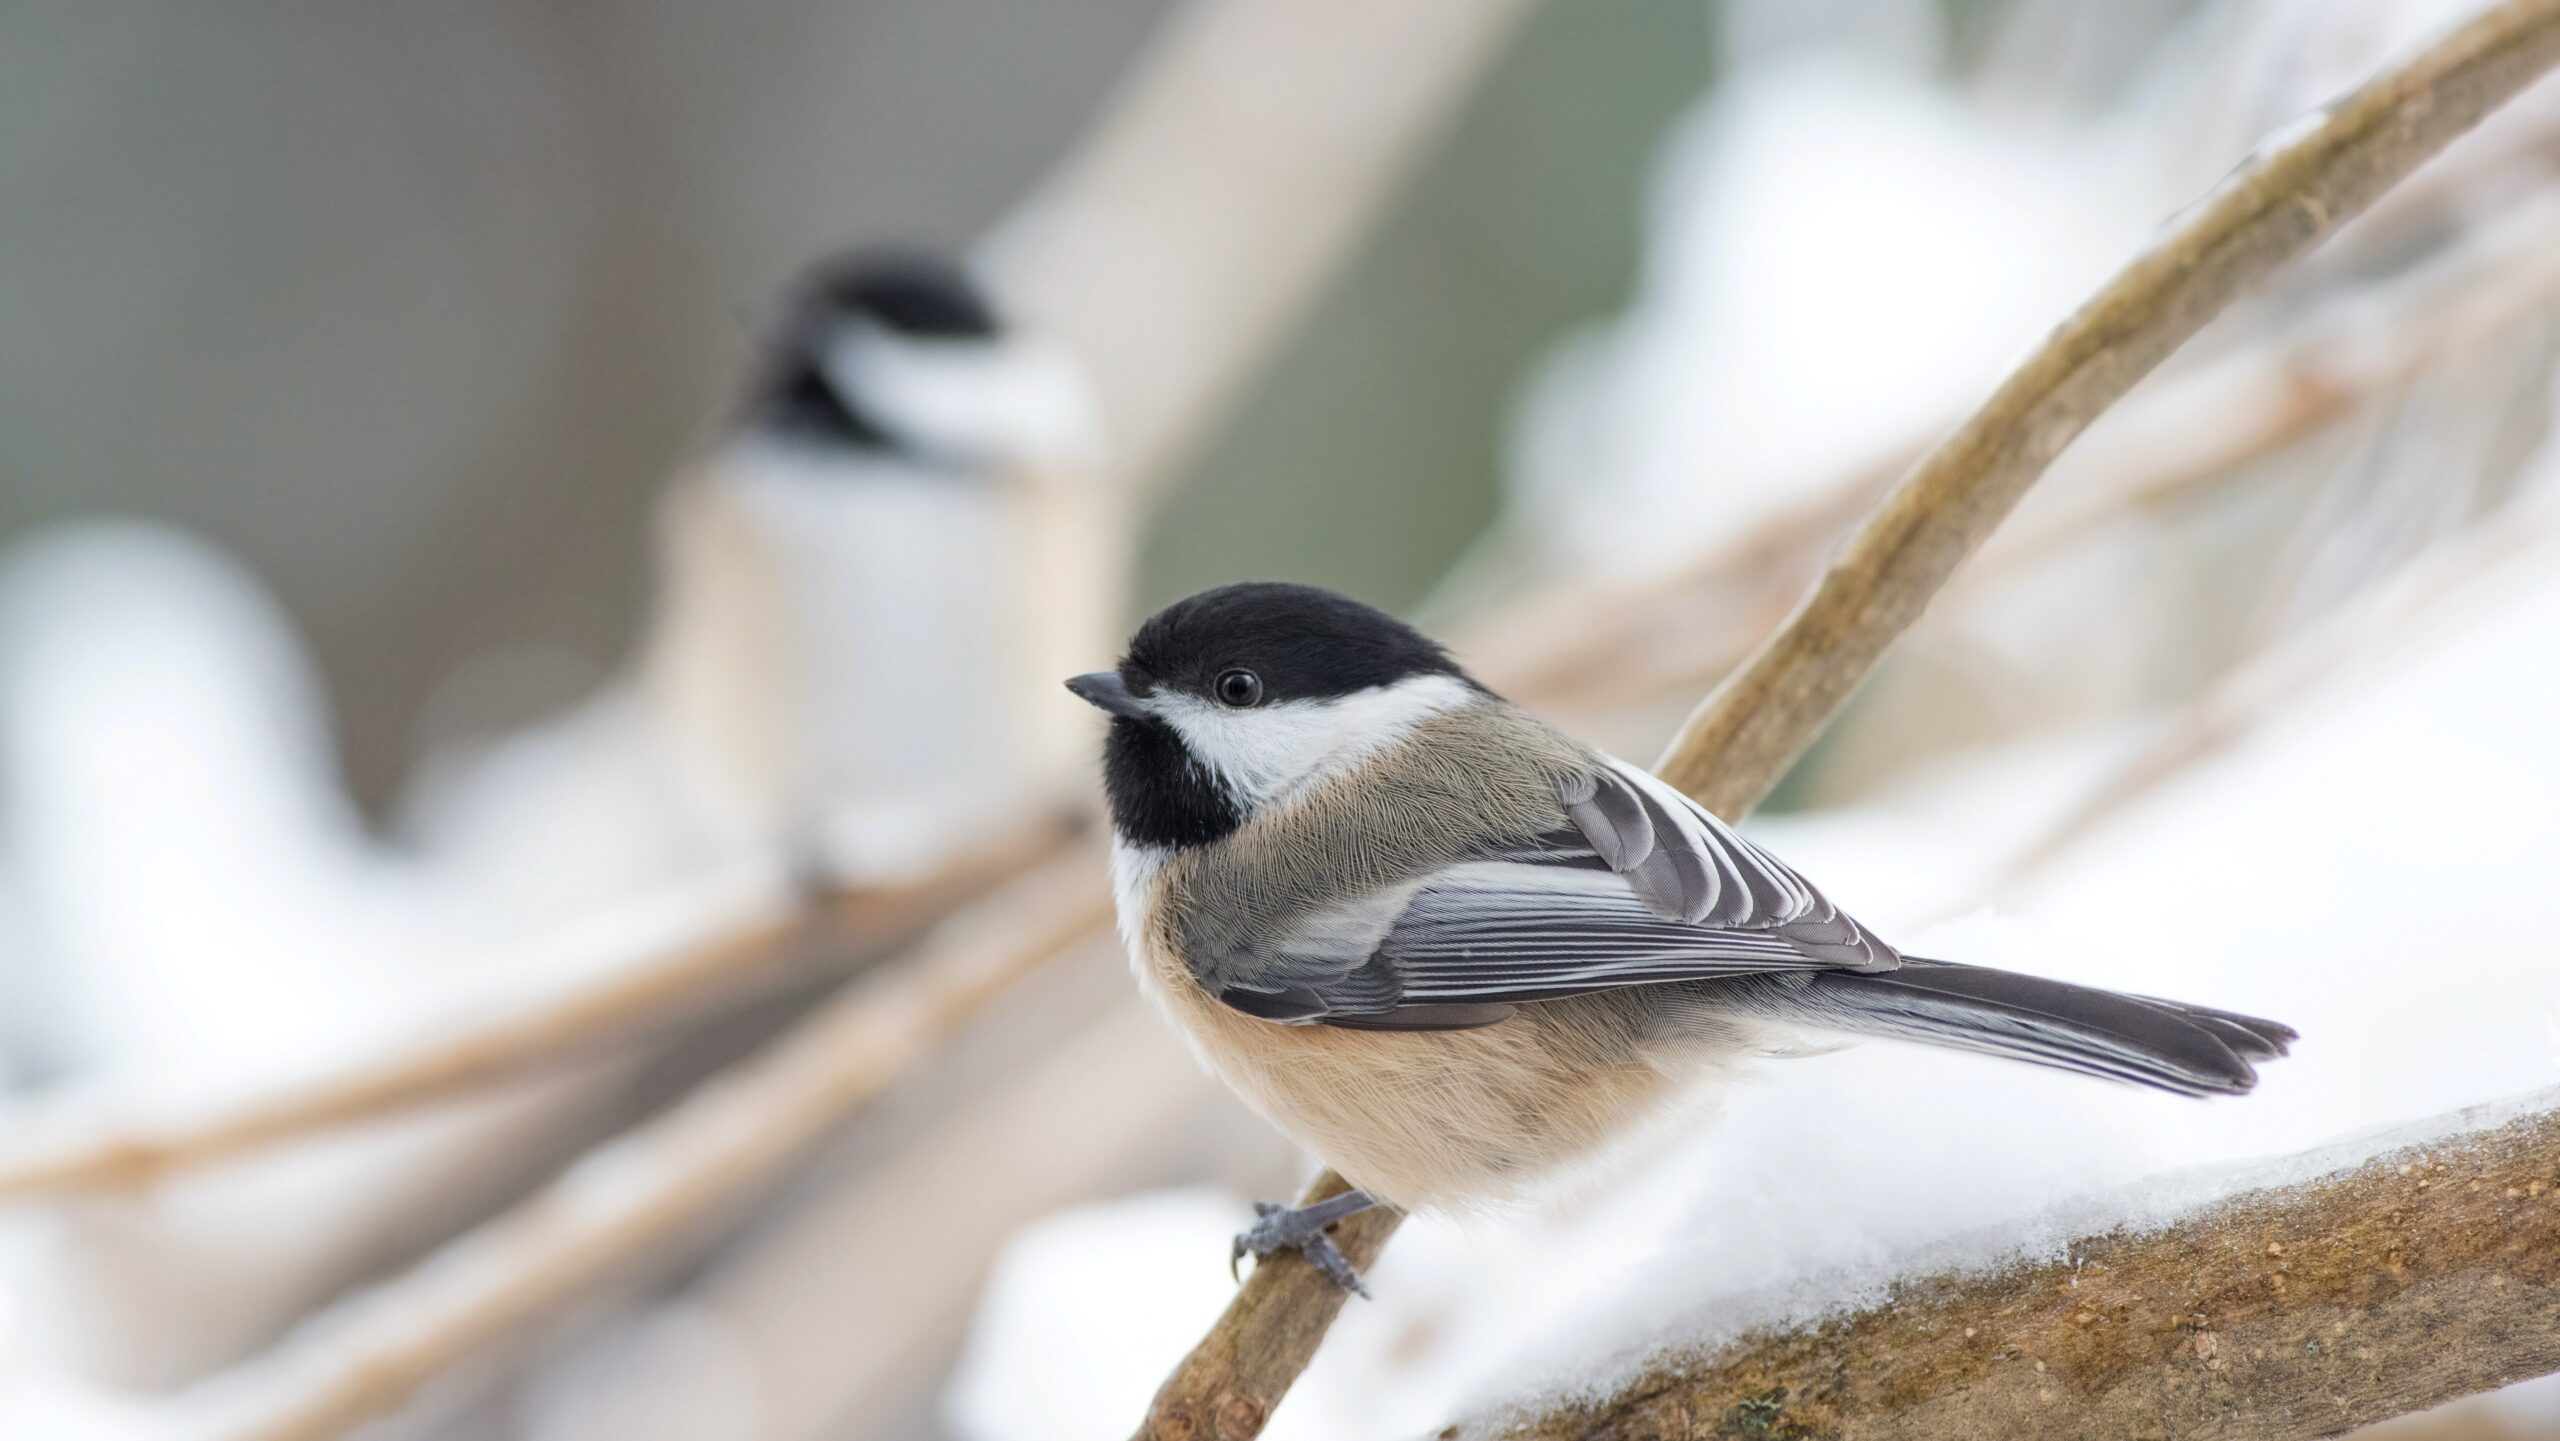 Song of the Chickadees